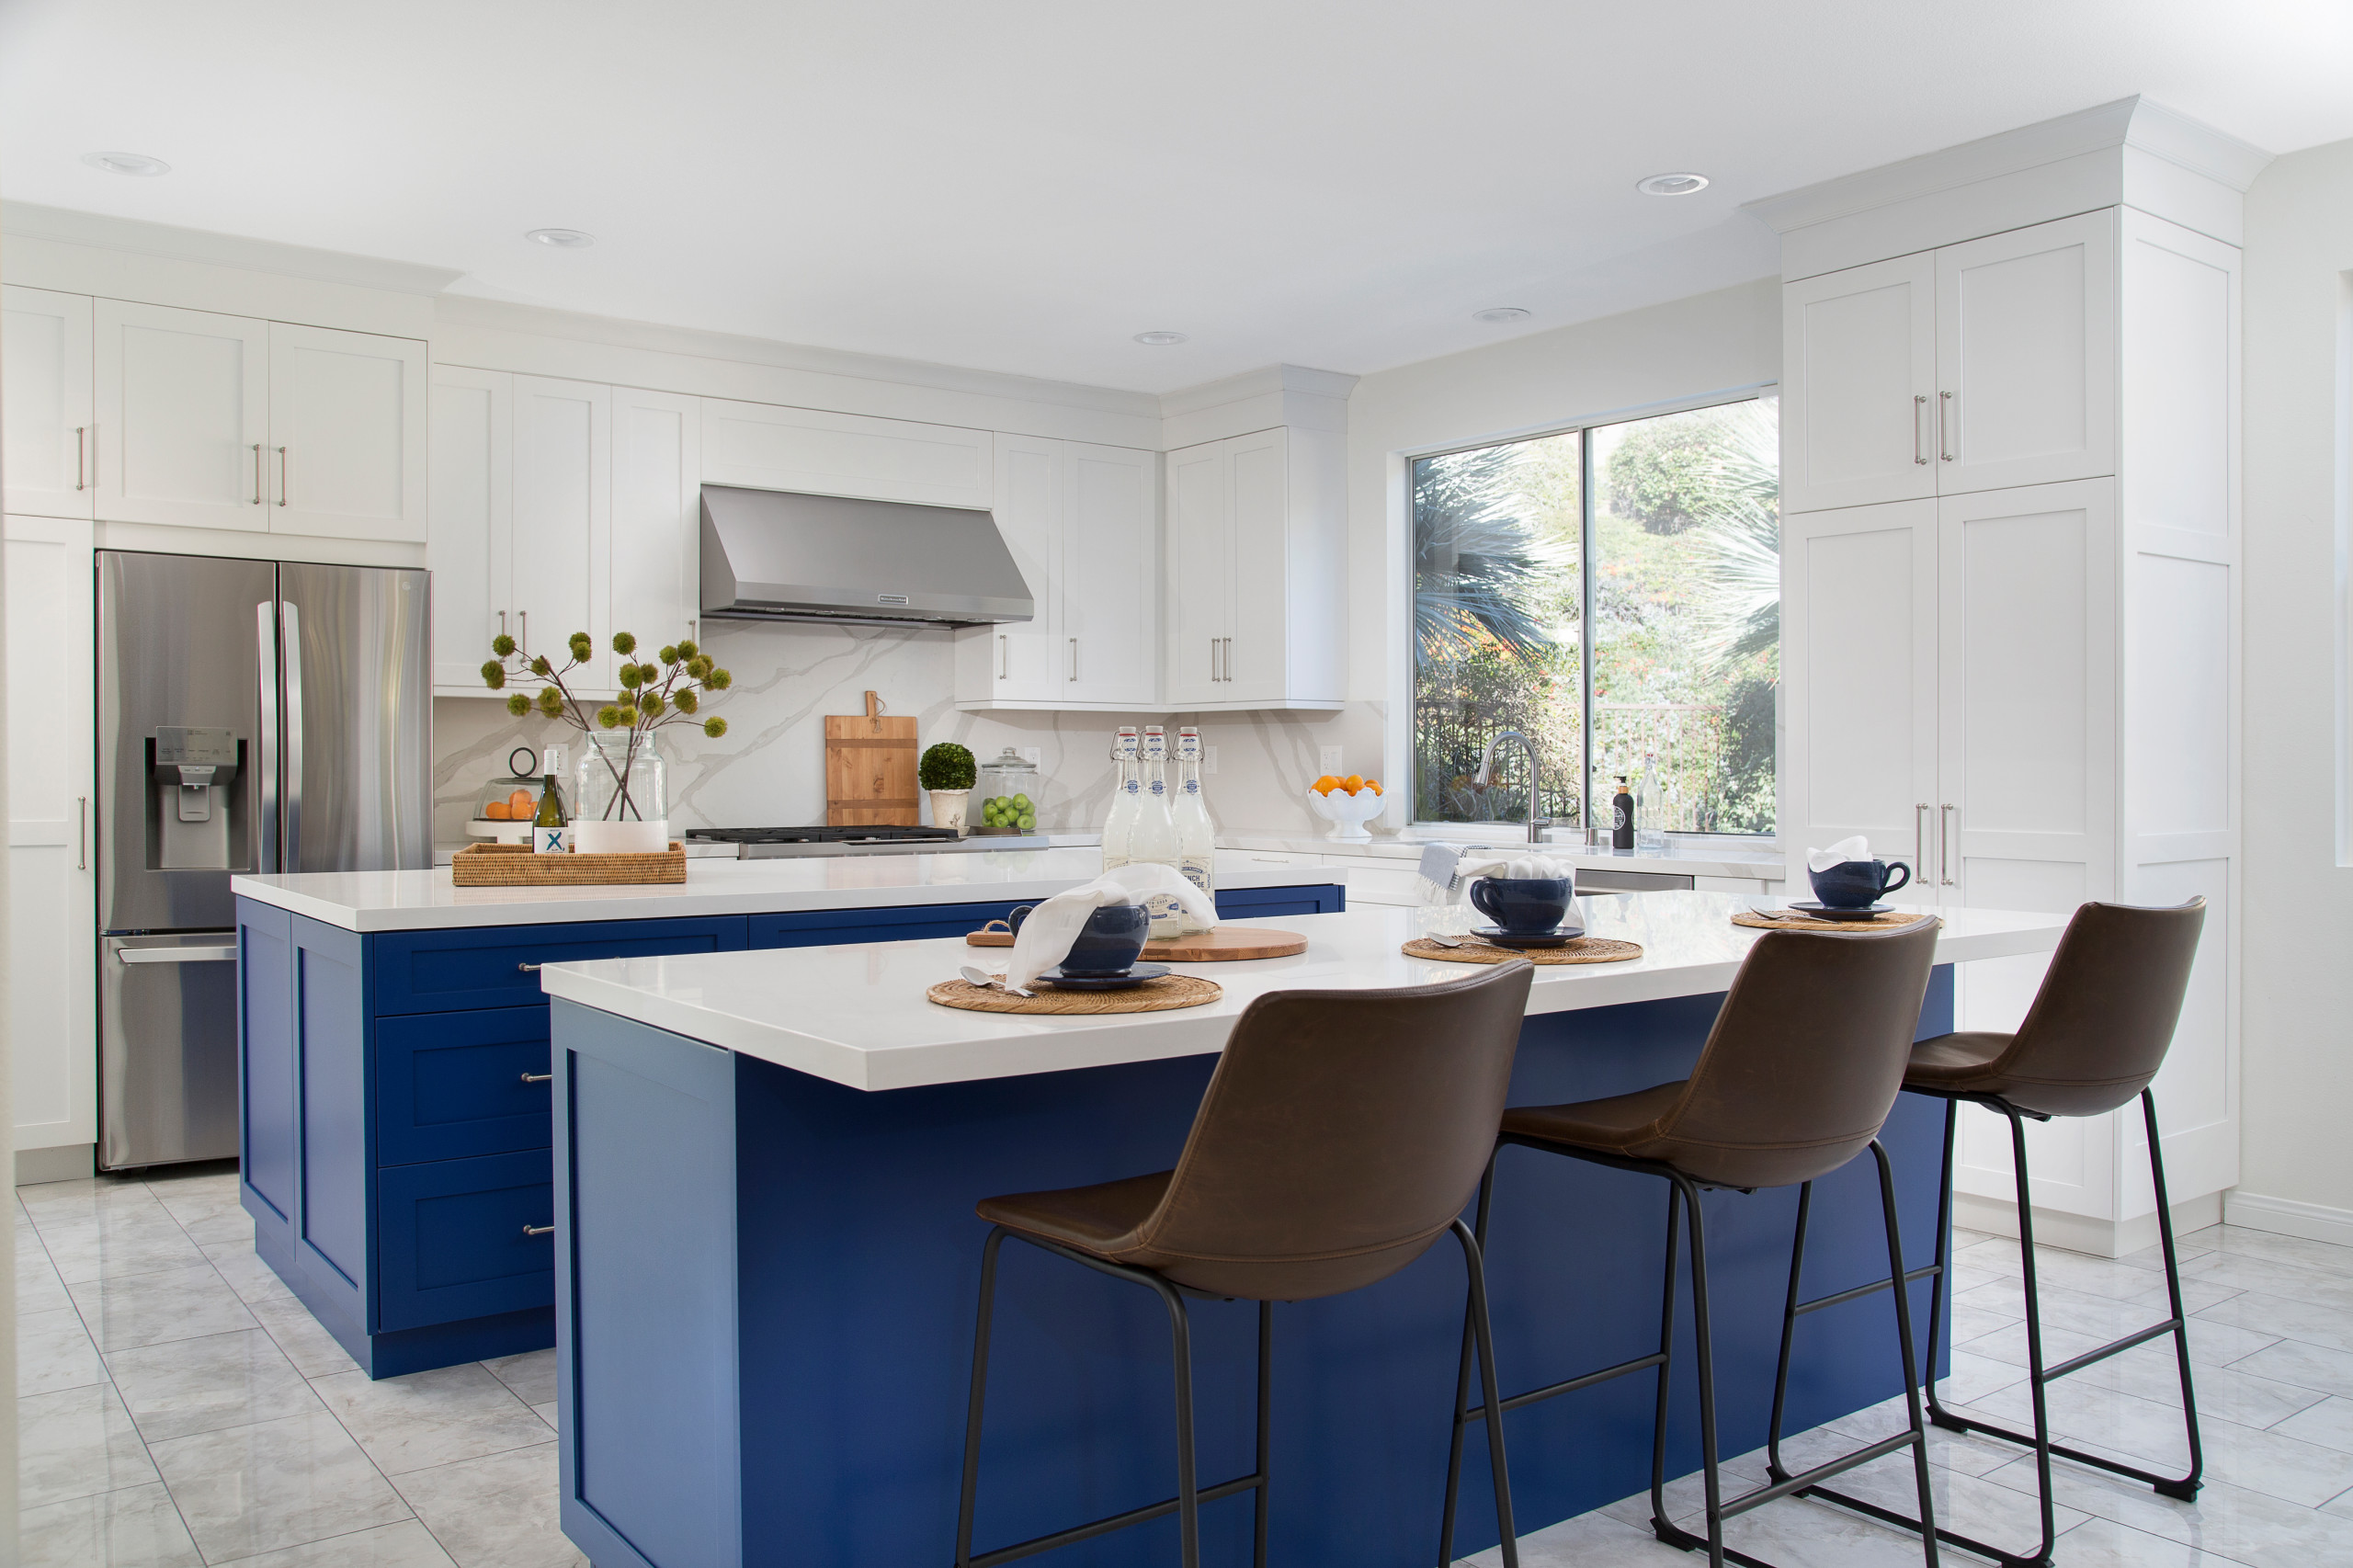 75 beautiful double island kitchen pictures & ideas | houzz